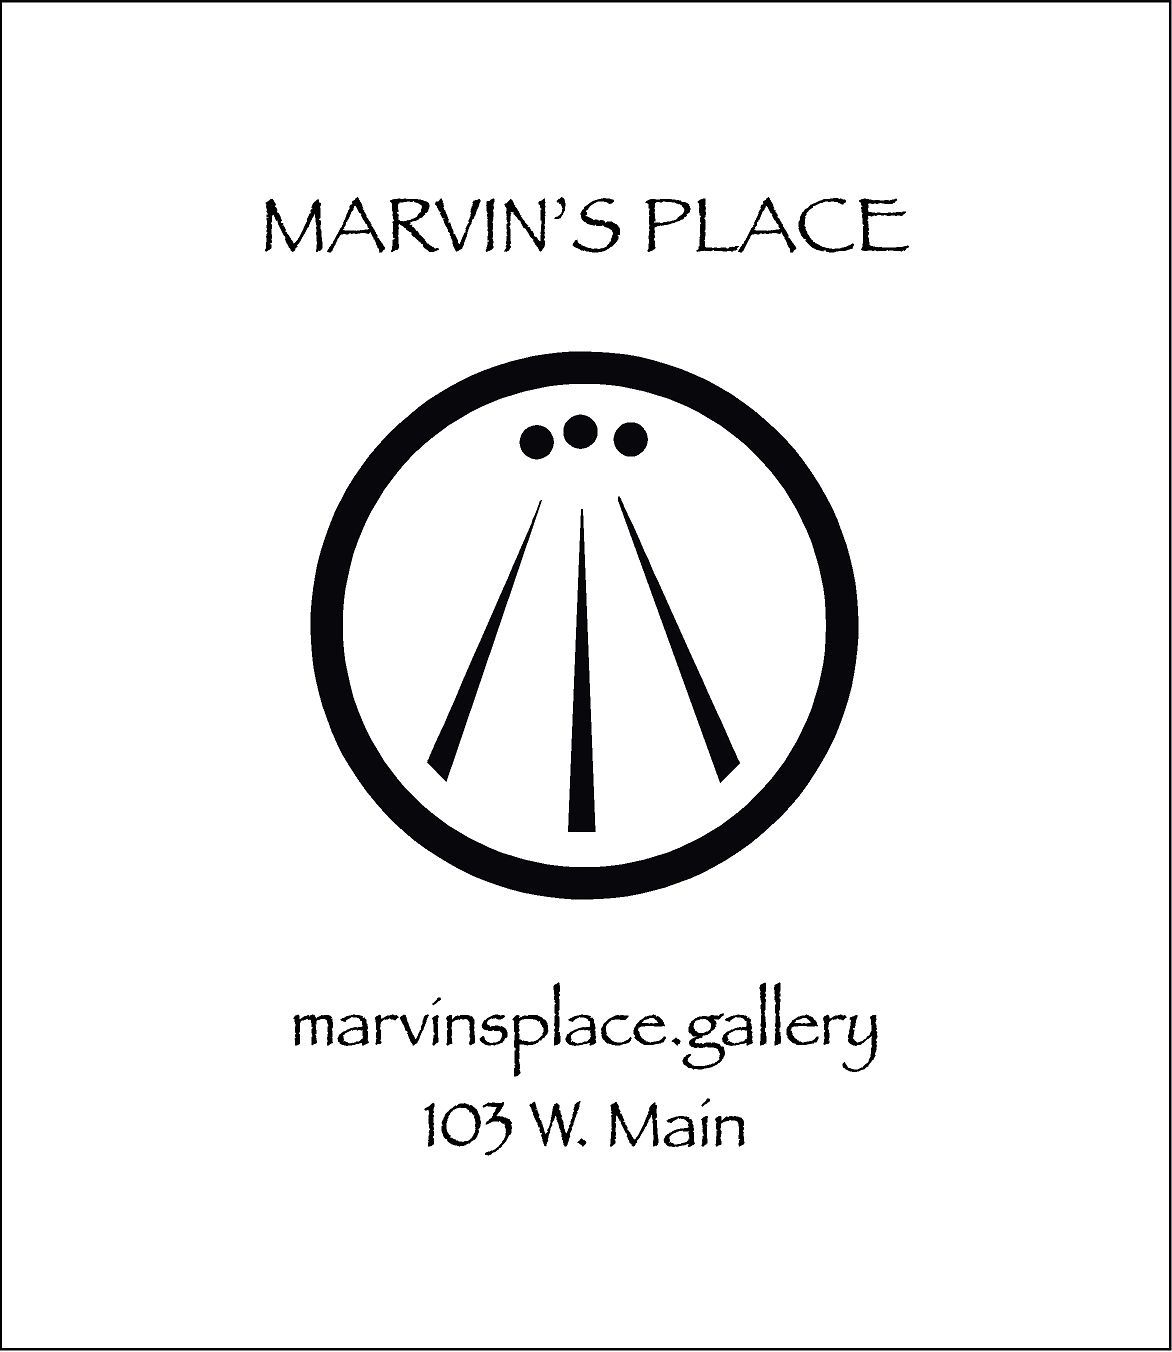 Marvin's Place